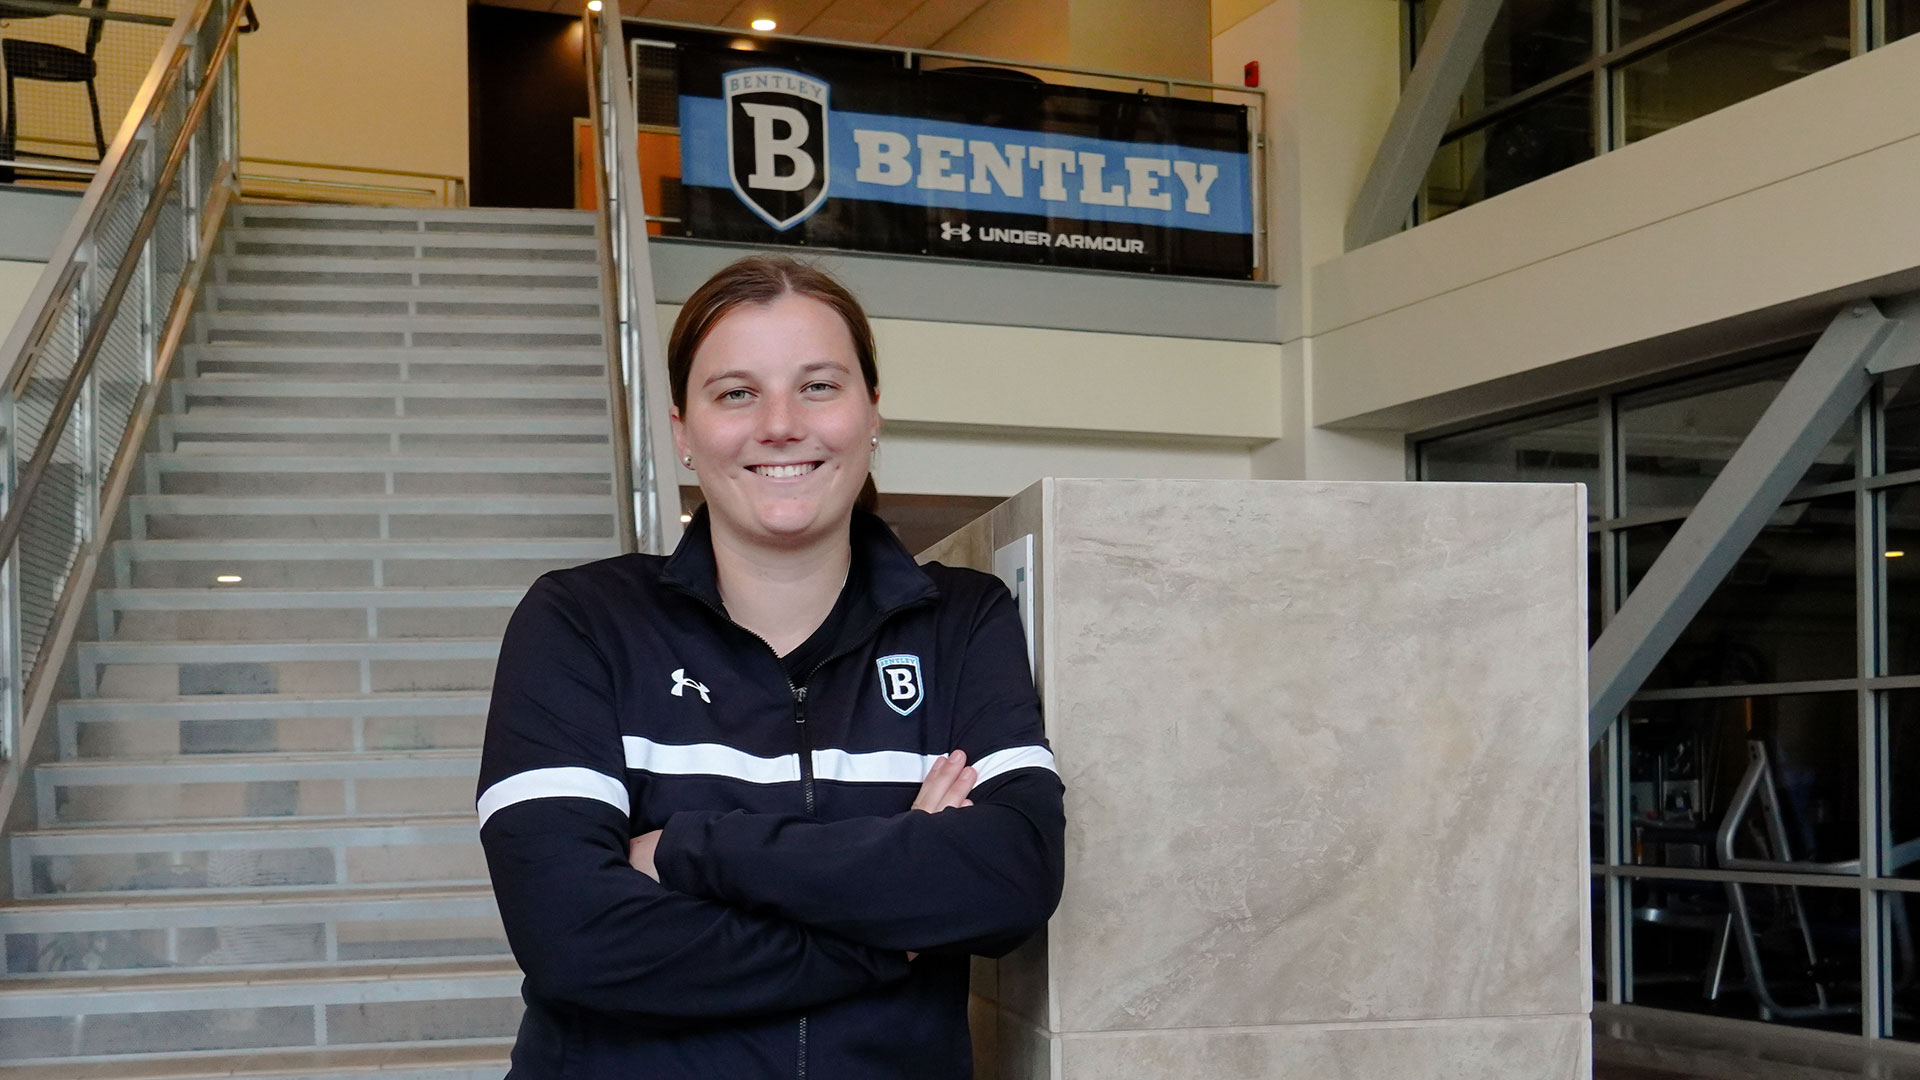 Carter joins Bentley Athletics as Manager of Student-Athlete Development